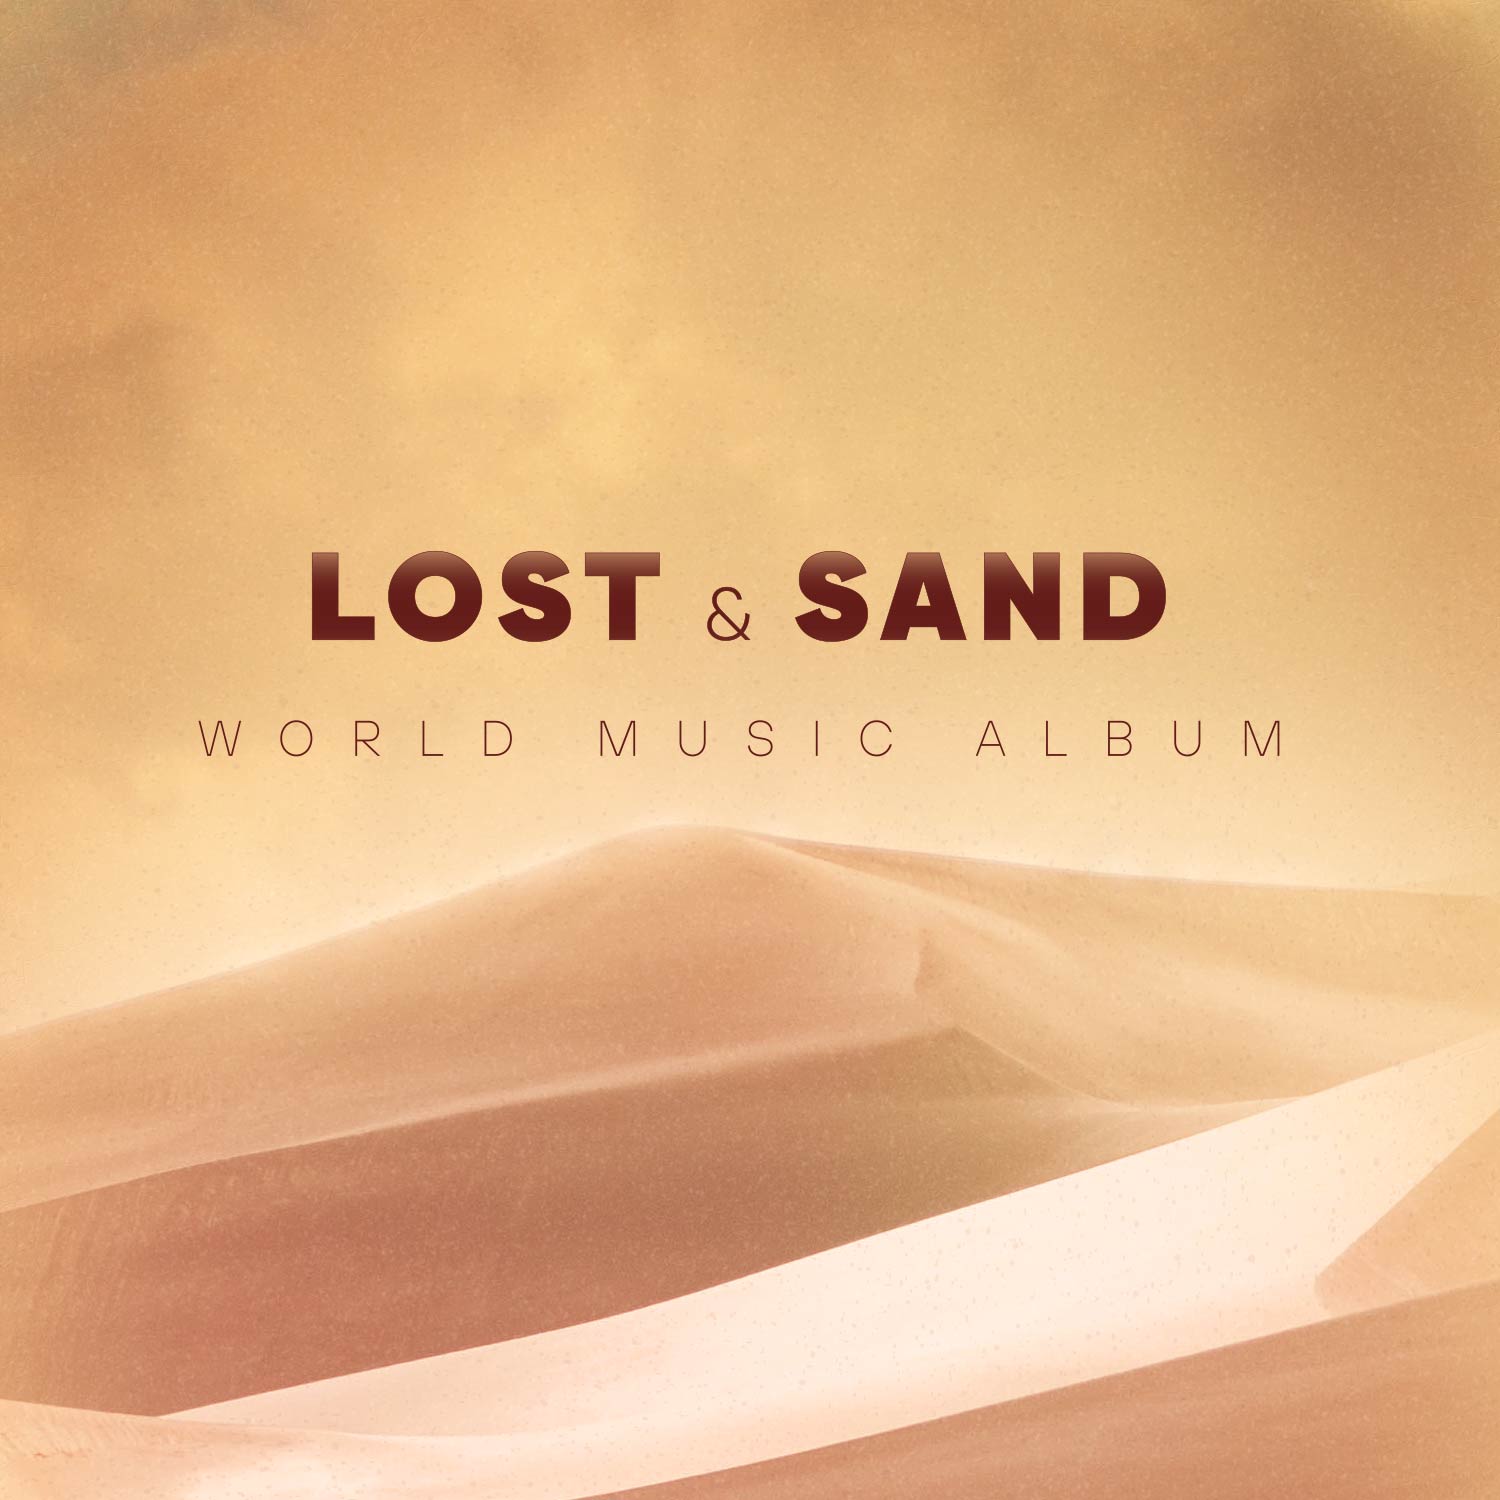 Lost & Sand